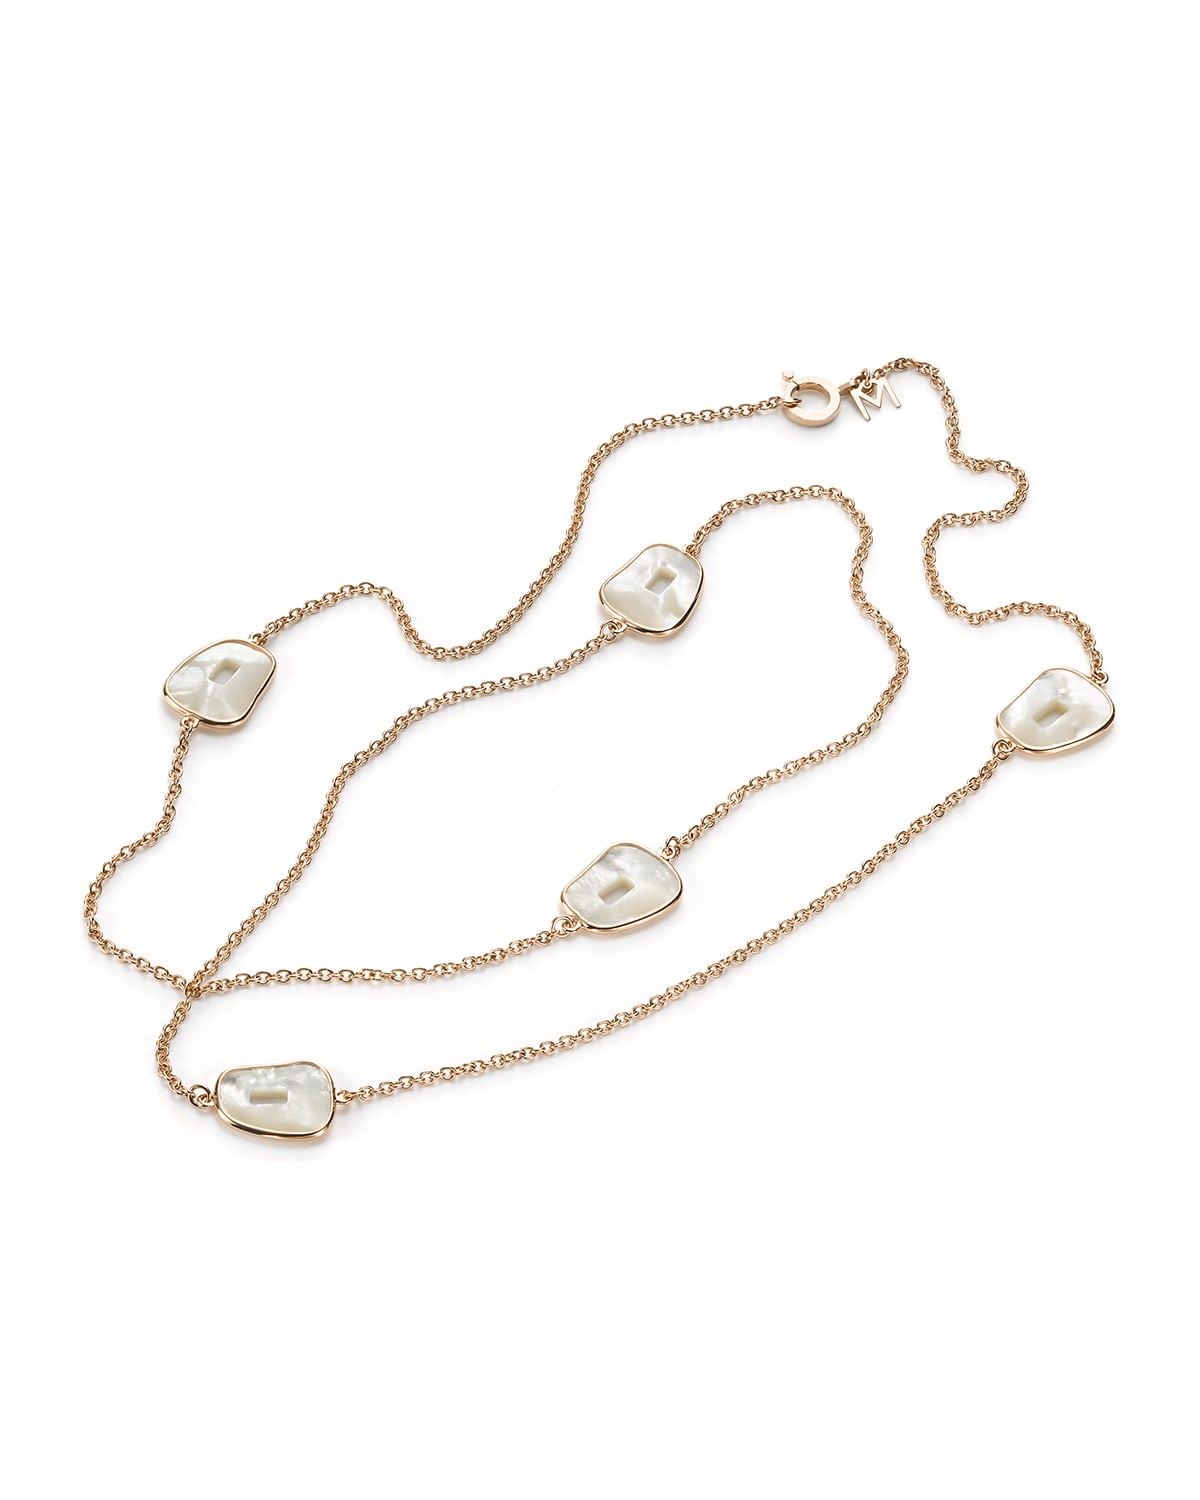 Mattioli Puzzle 18k Rose Gold Long 5-Mother-of-Pearl Necklace